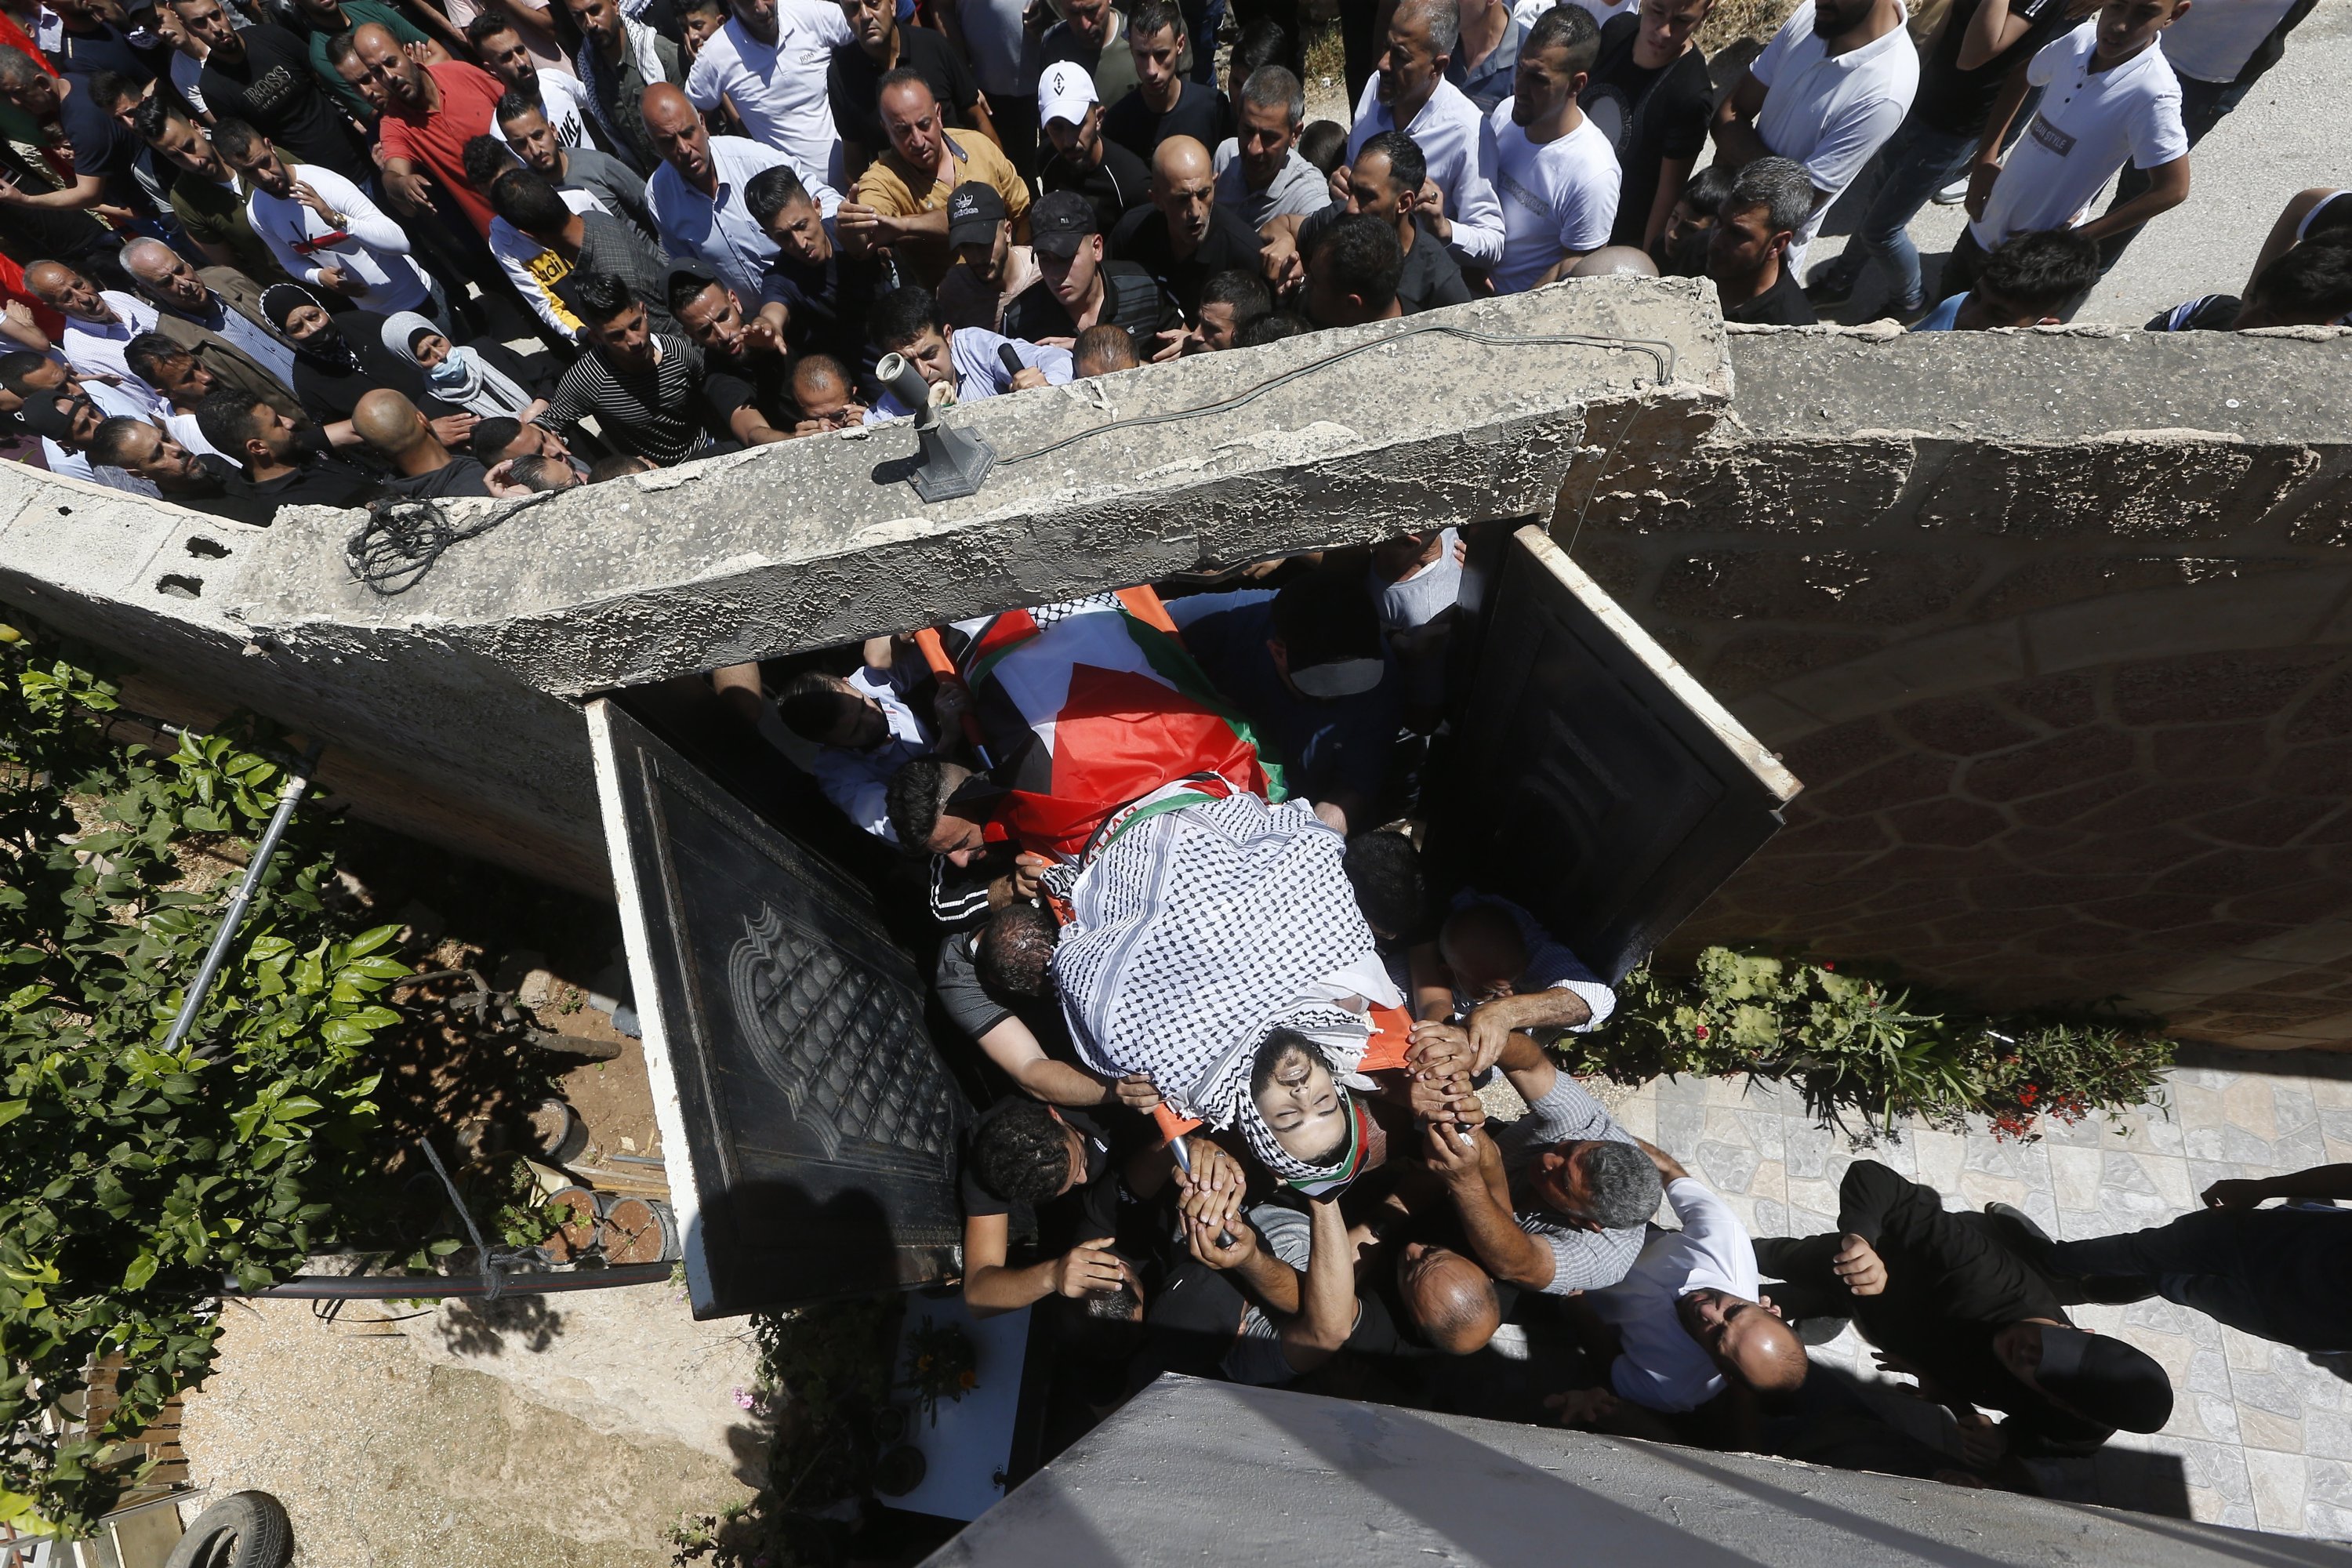 Mourners carry the body of Palestinian Malik Hamdan, who was killed by Israeli troops, during his funeral in the village of Salem near Nablus, in the occupied West Bank, Palestine, May 15, 2021. (EPA Photo)